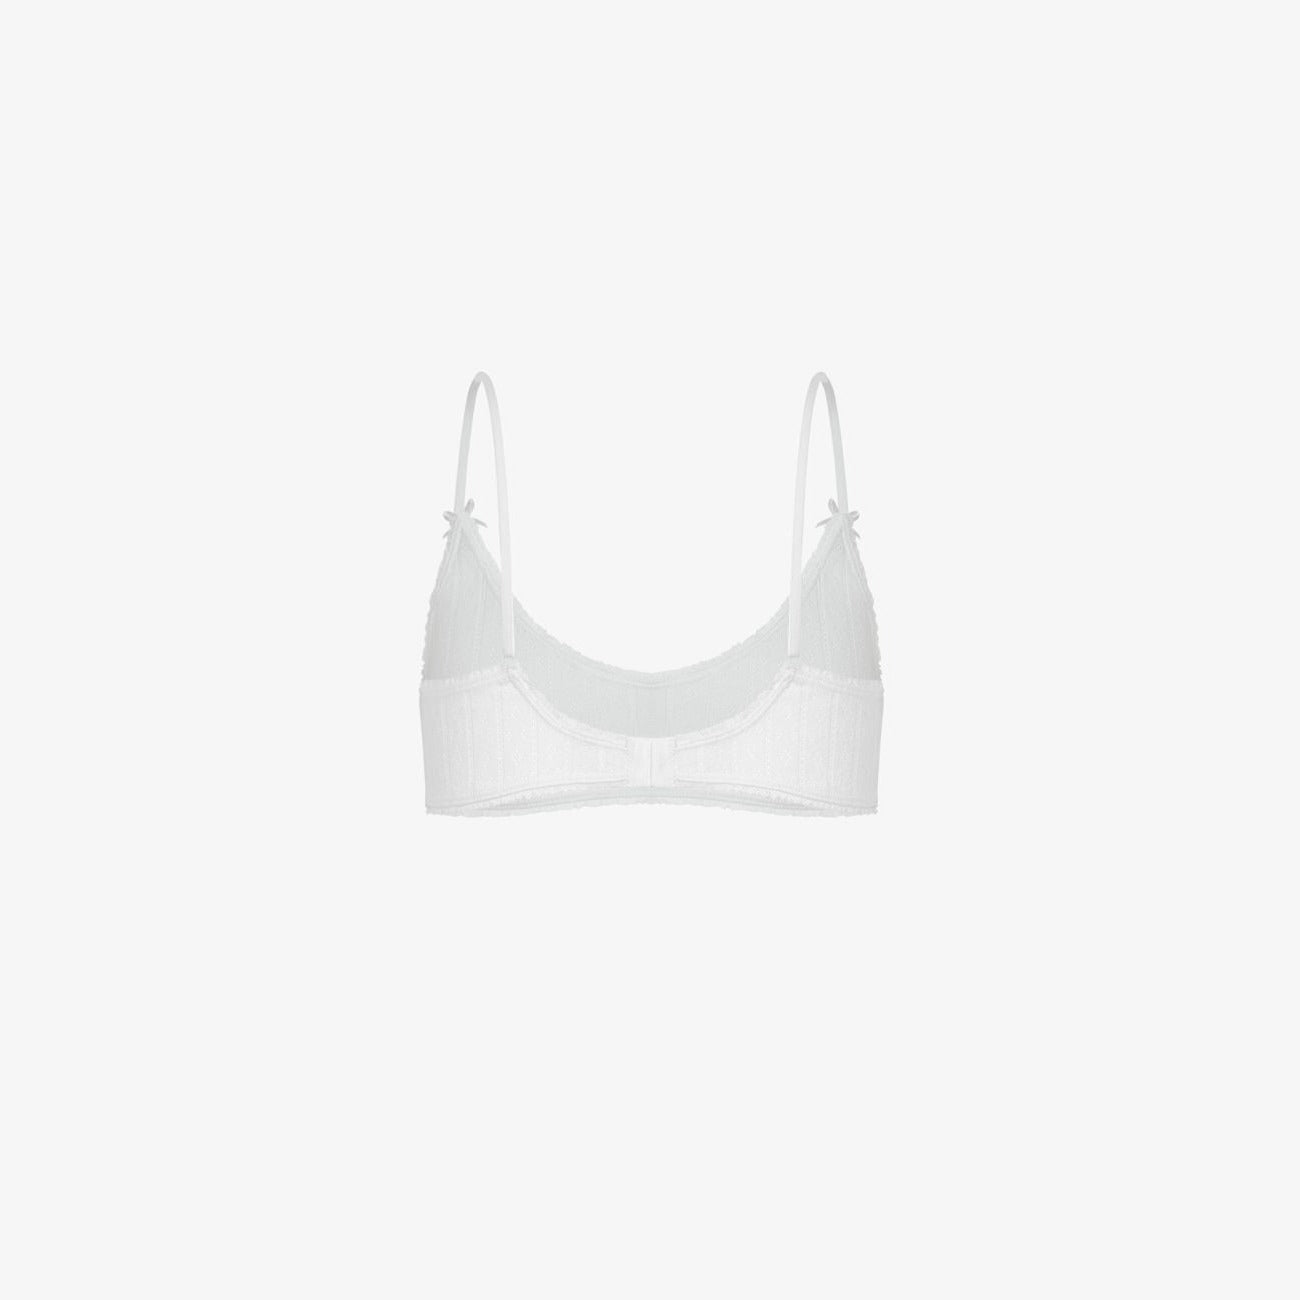 Soft cup bra EVIDENCE rose white - pink